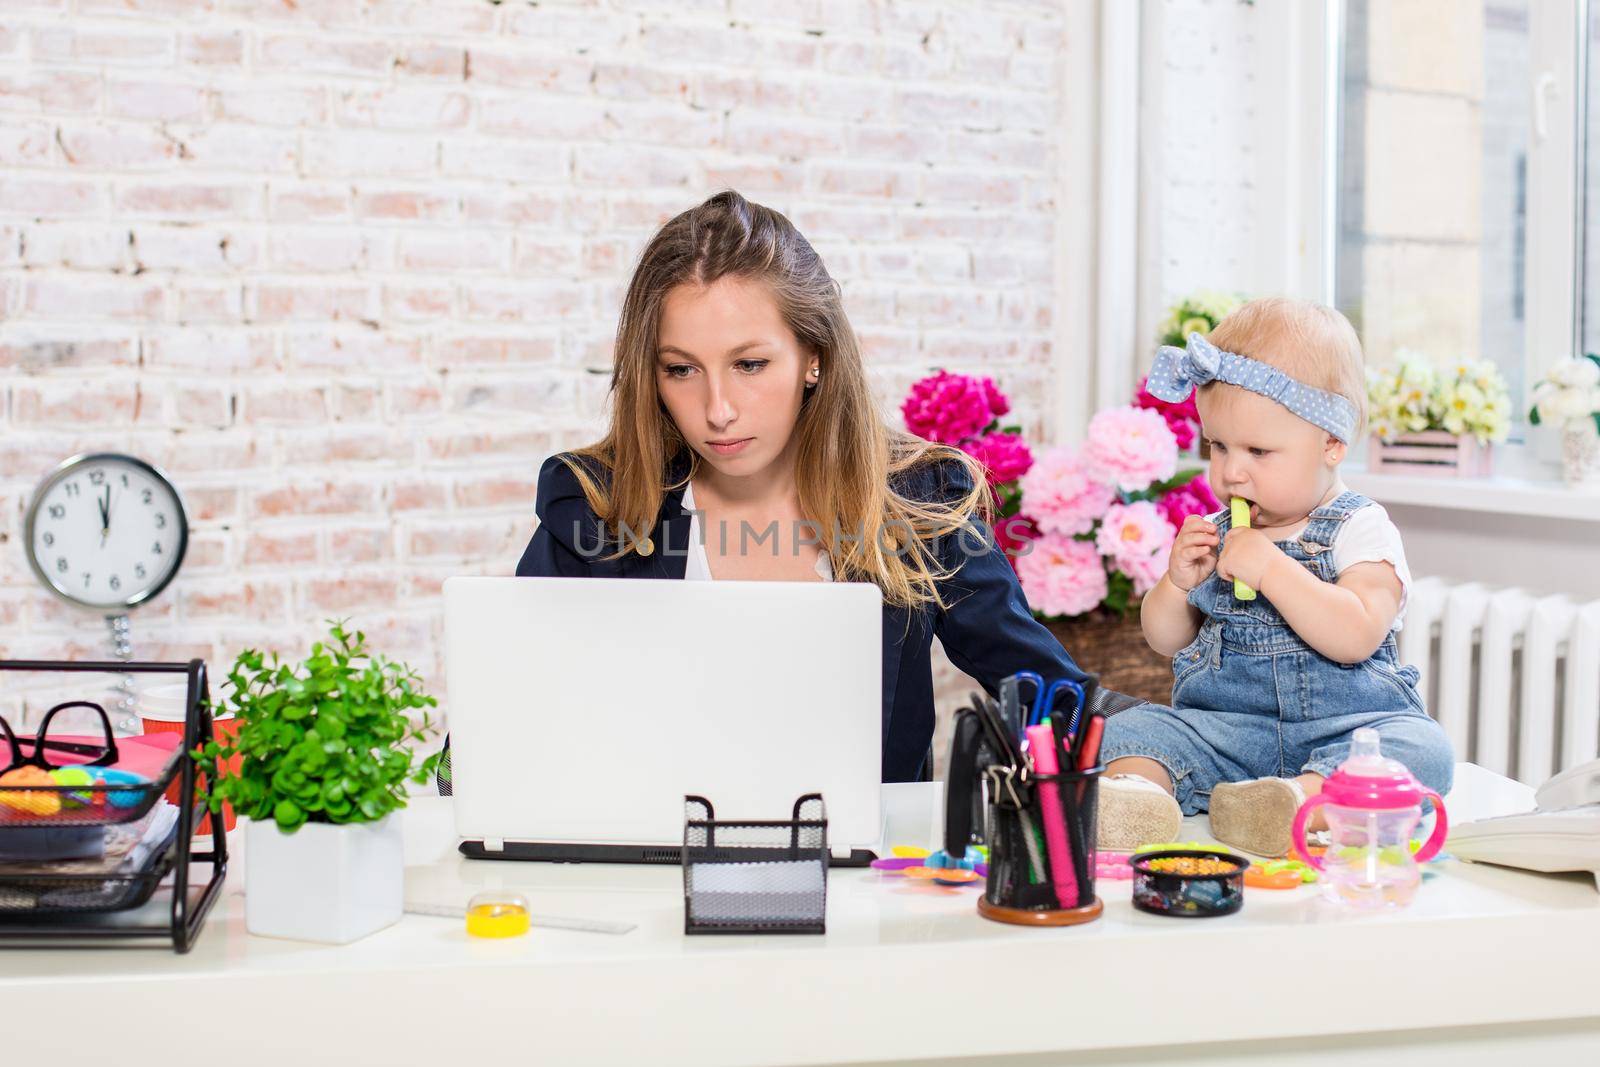 Working together is so fun Cheerful young beautiful businesswoman looking at laptop while sitting at her working place with her little daughter